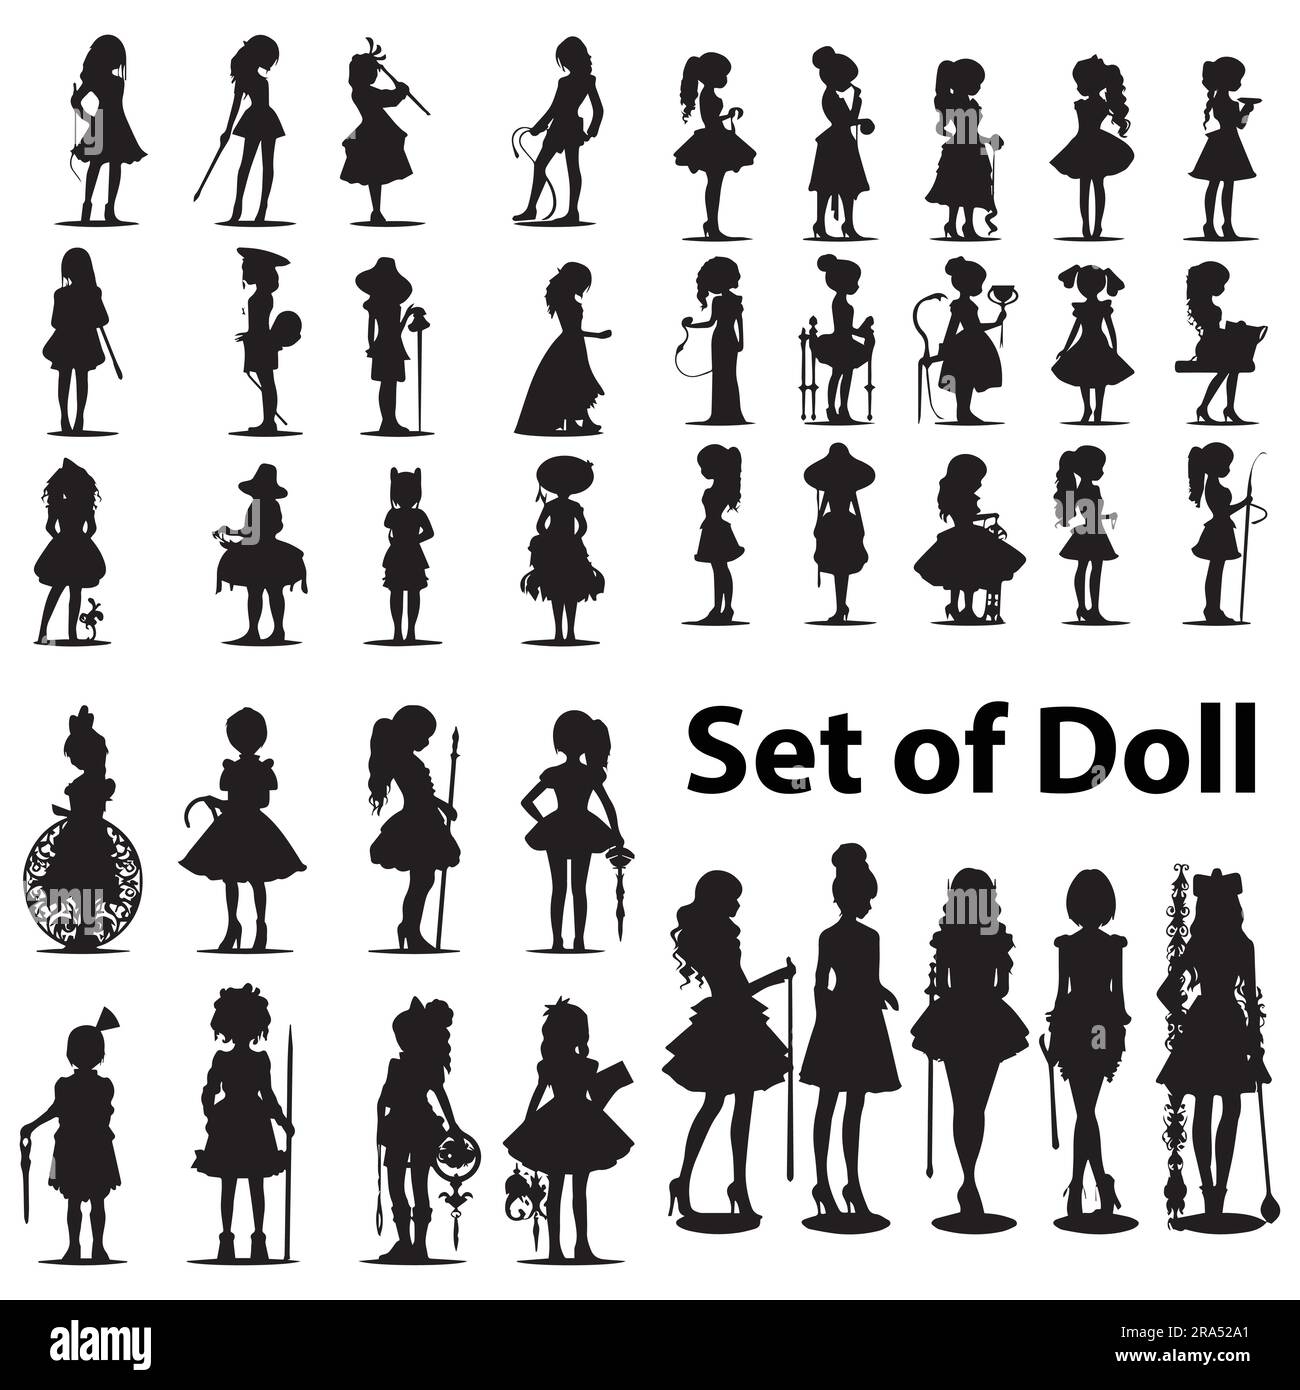 A set of silhouette doll vector illustration Stock Vector